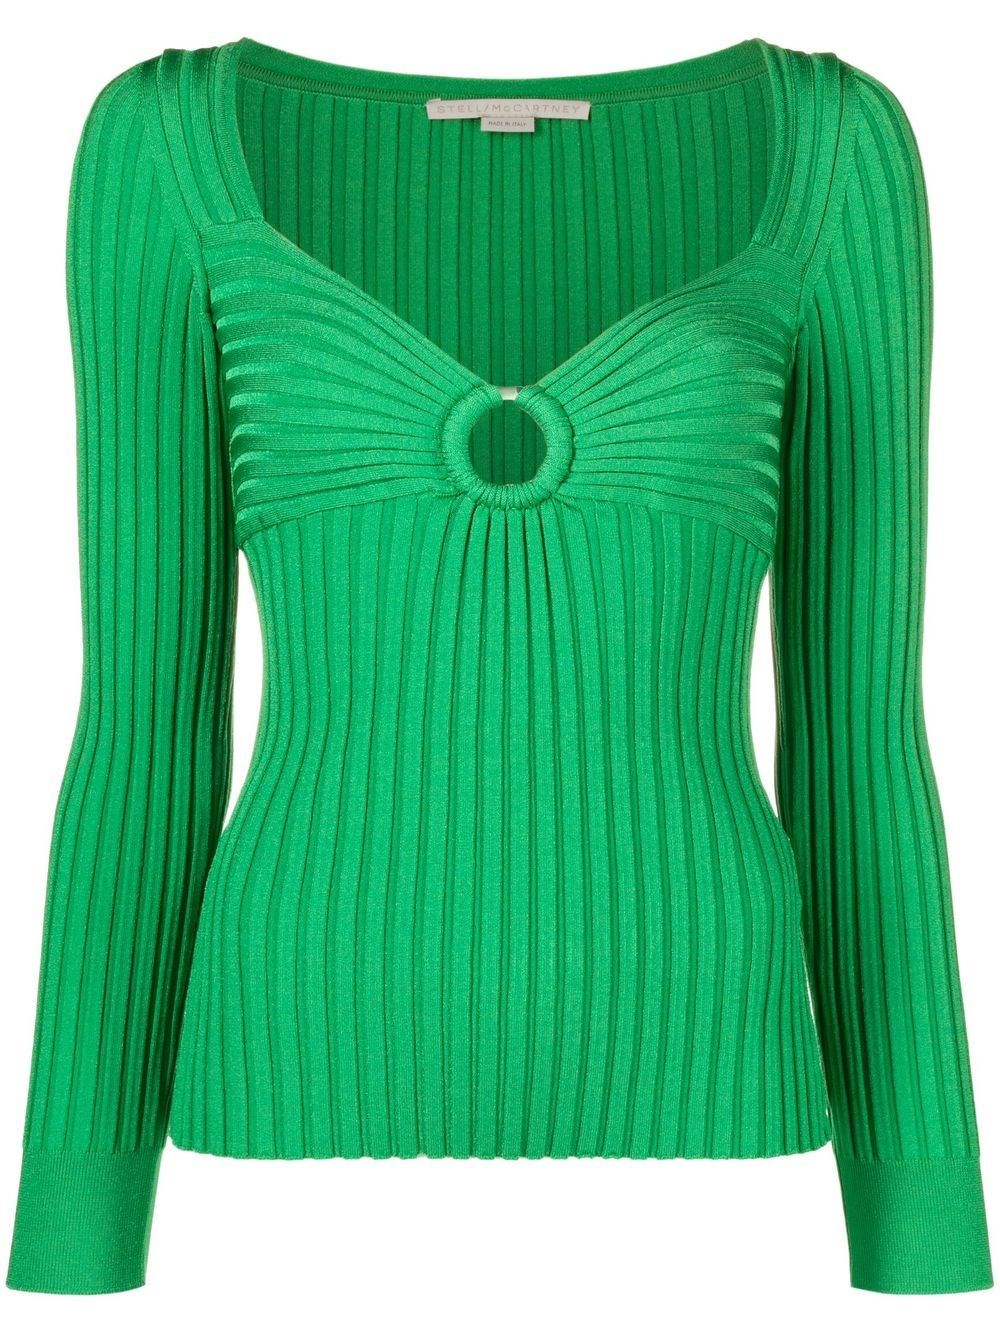 STELLA MCCARTNEY RIBBED KNIT TOP WITH CUT-OUT